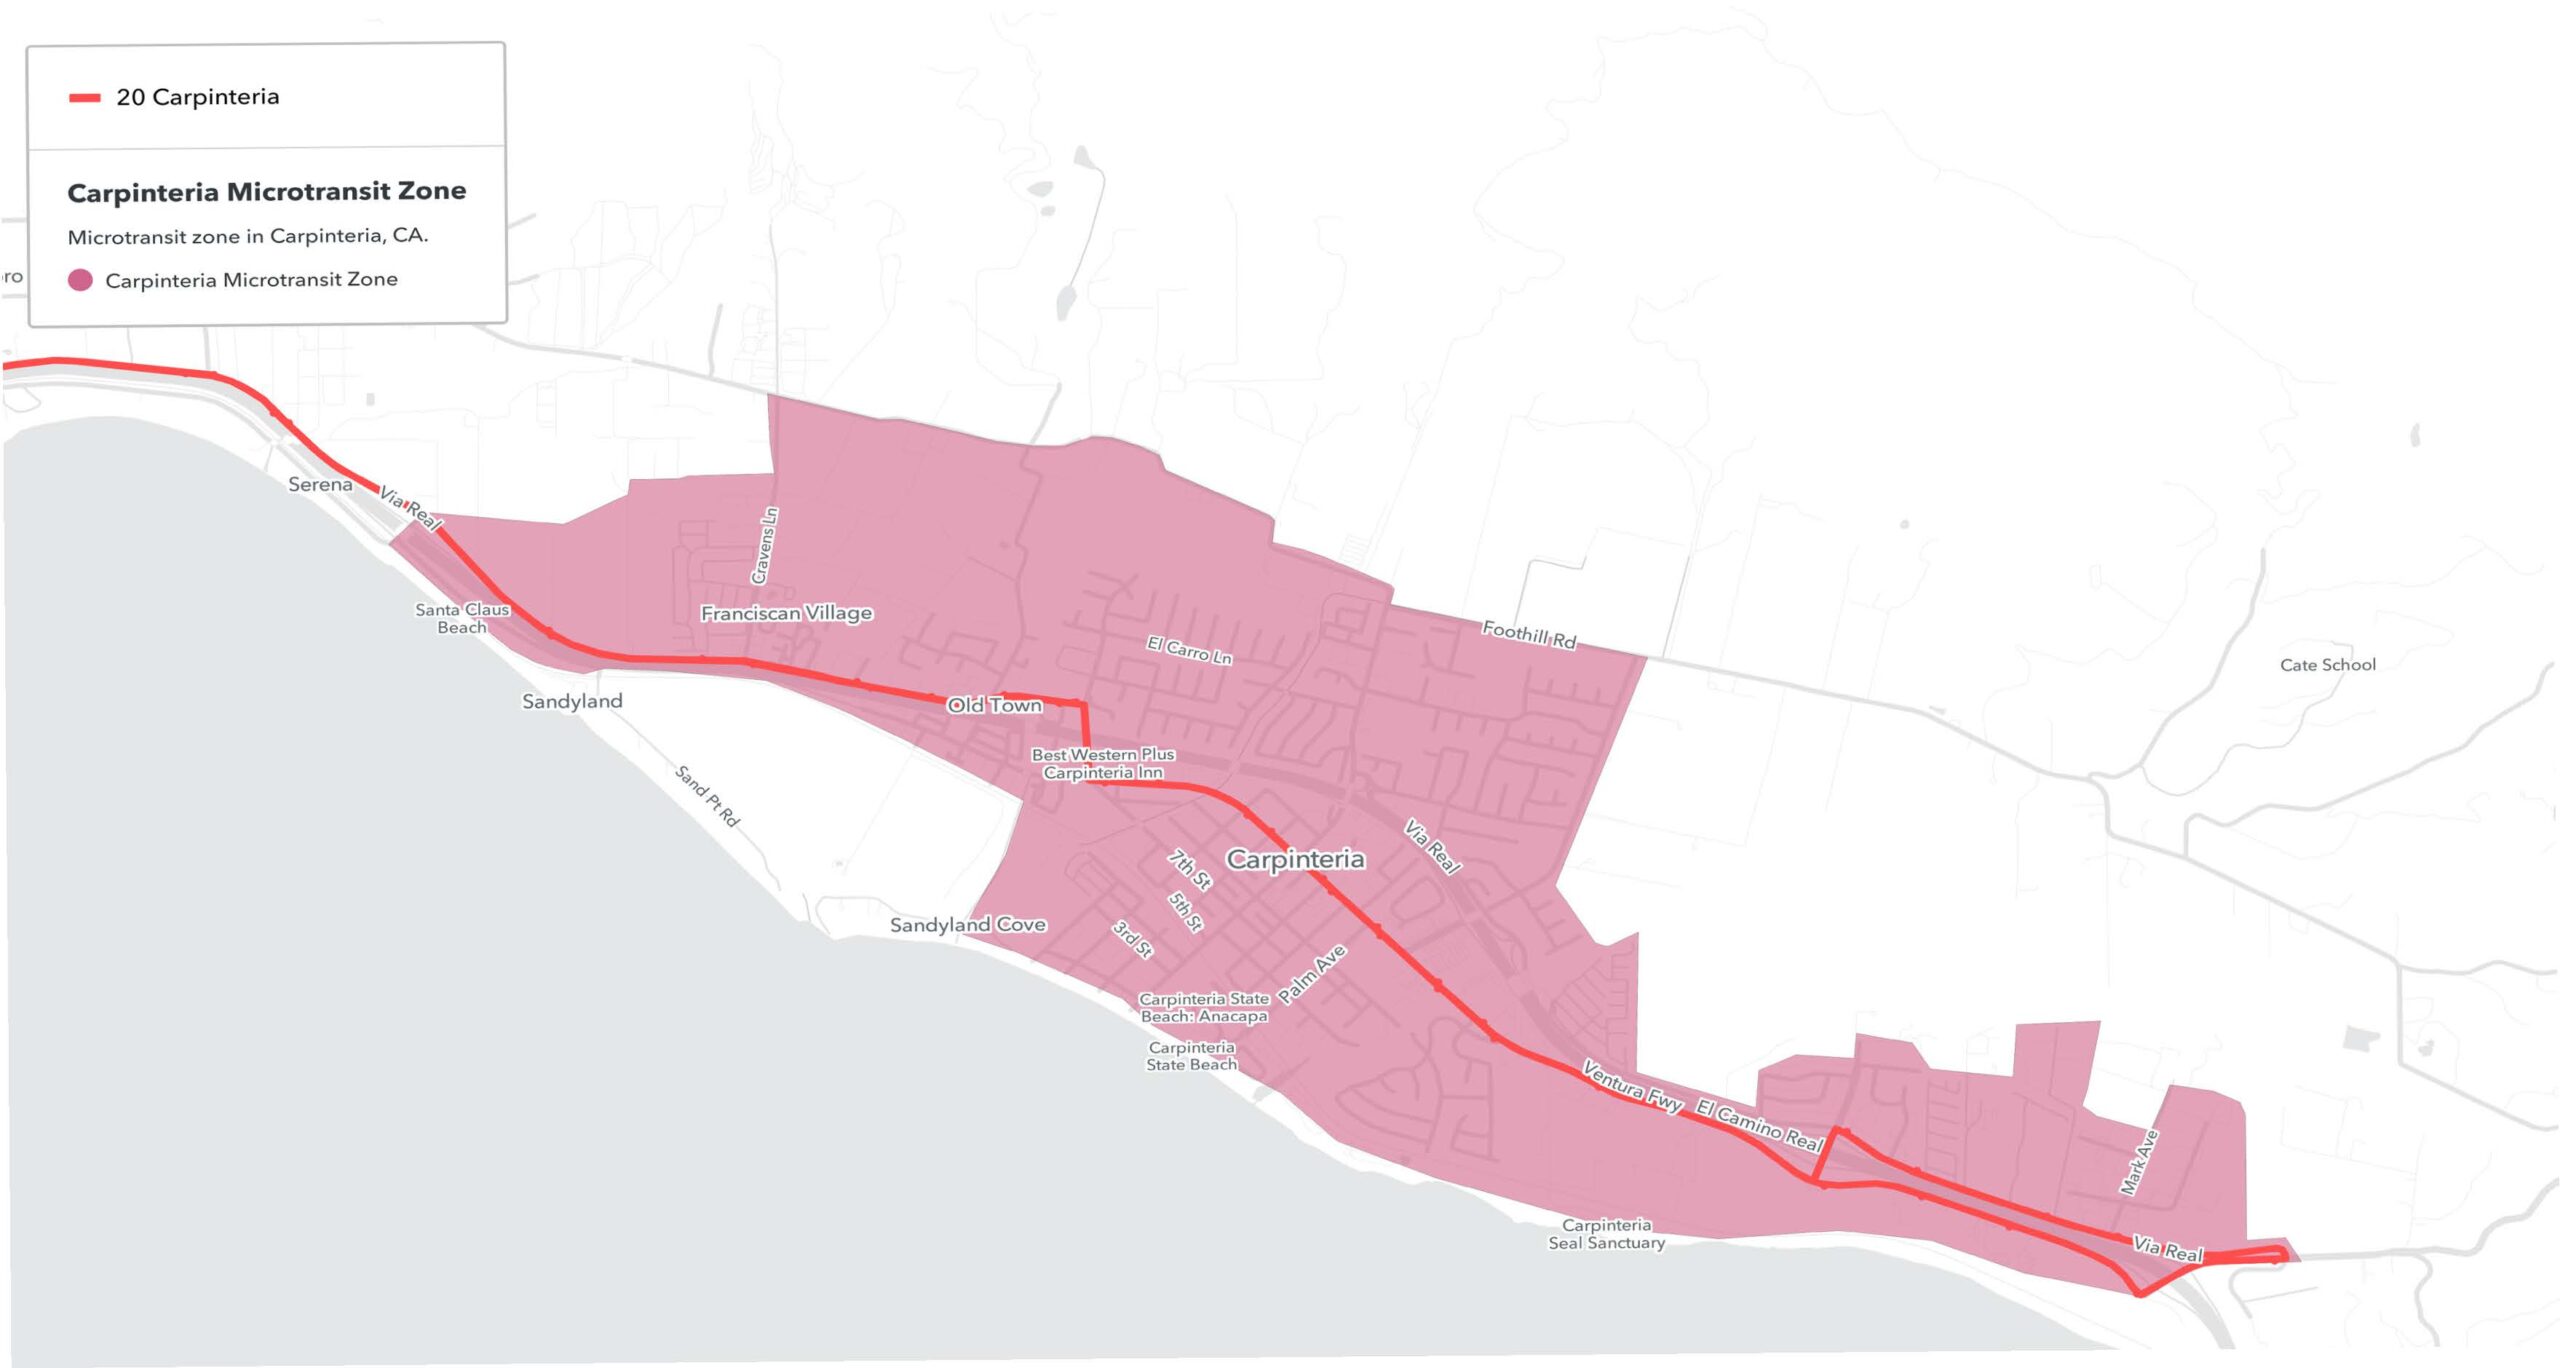 A map of the Carpinteria area shaded red to indicate the availability of microtransit service within that zone. 